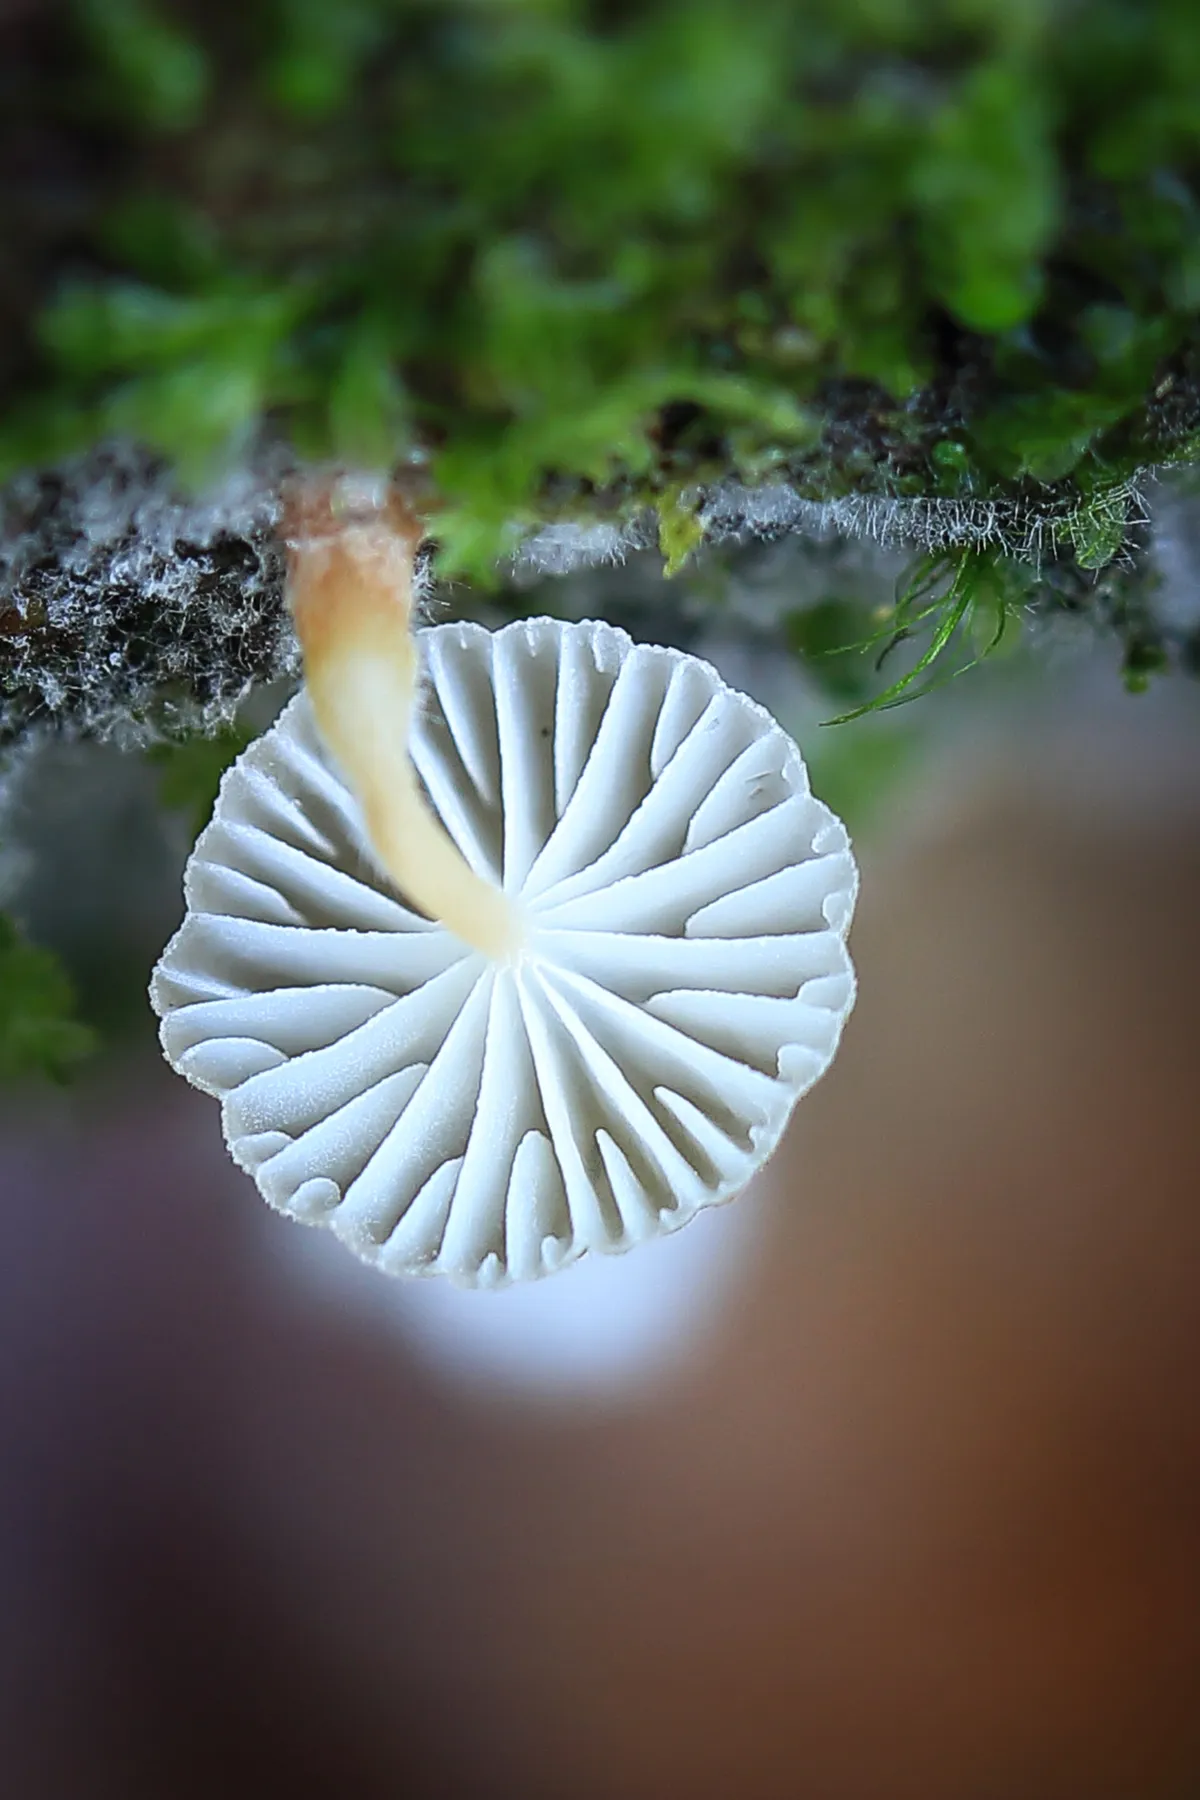 The stunning underside of a minute and delicate white fungi. © Arwen Dyer